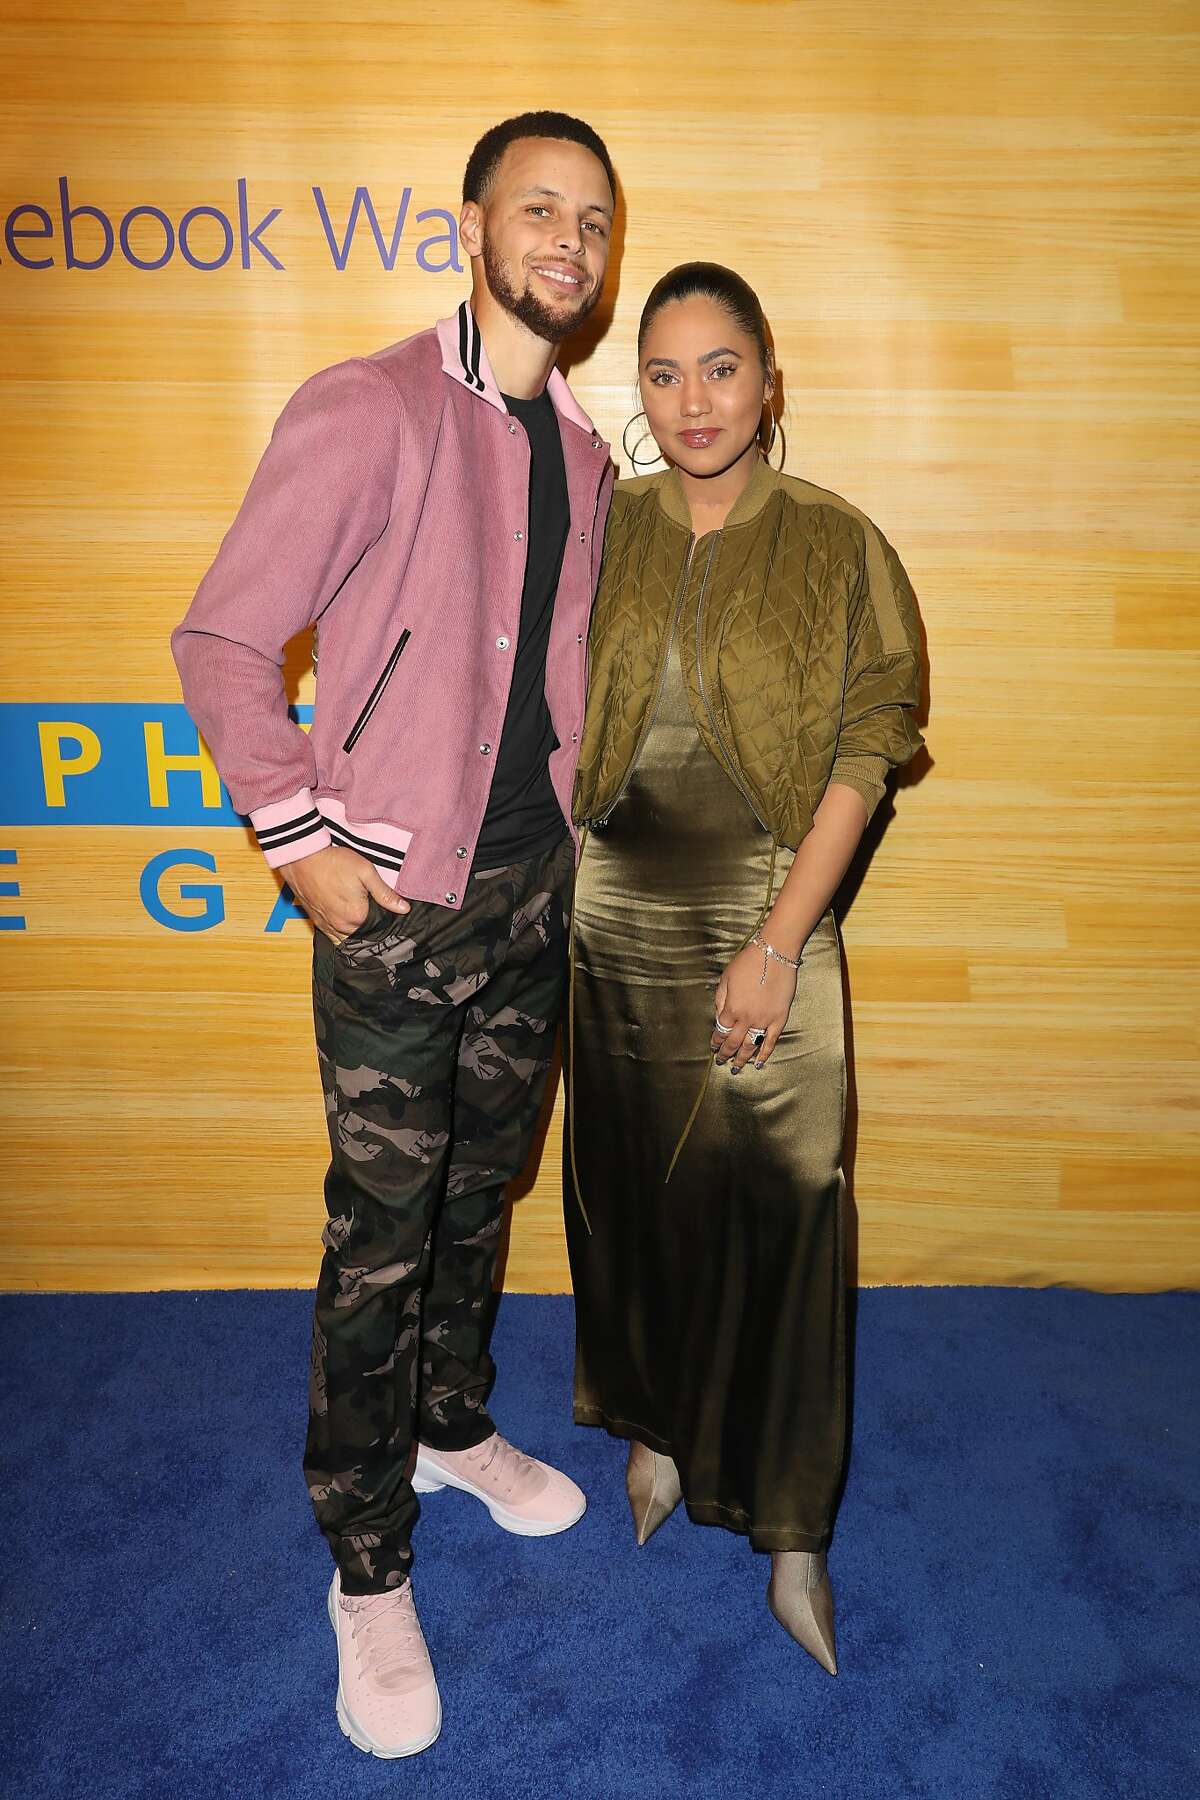 Stephen and Ayesha Curry pose for a photo on the red carpet at 16th Street Station on April 1, 2019 in Oakland, California. 